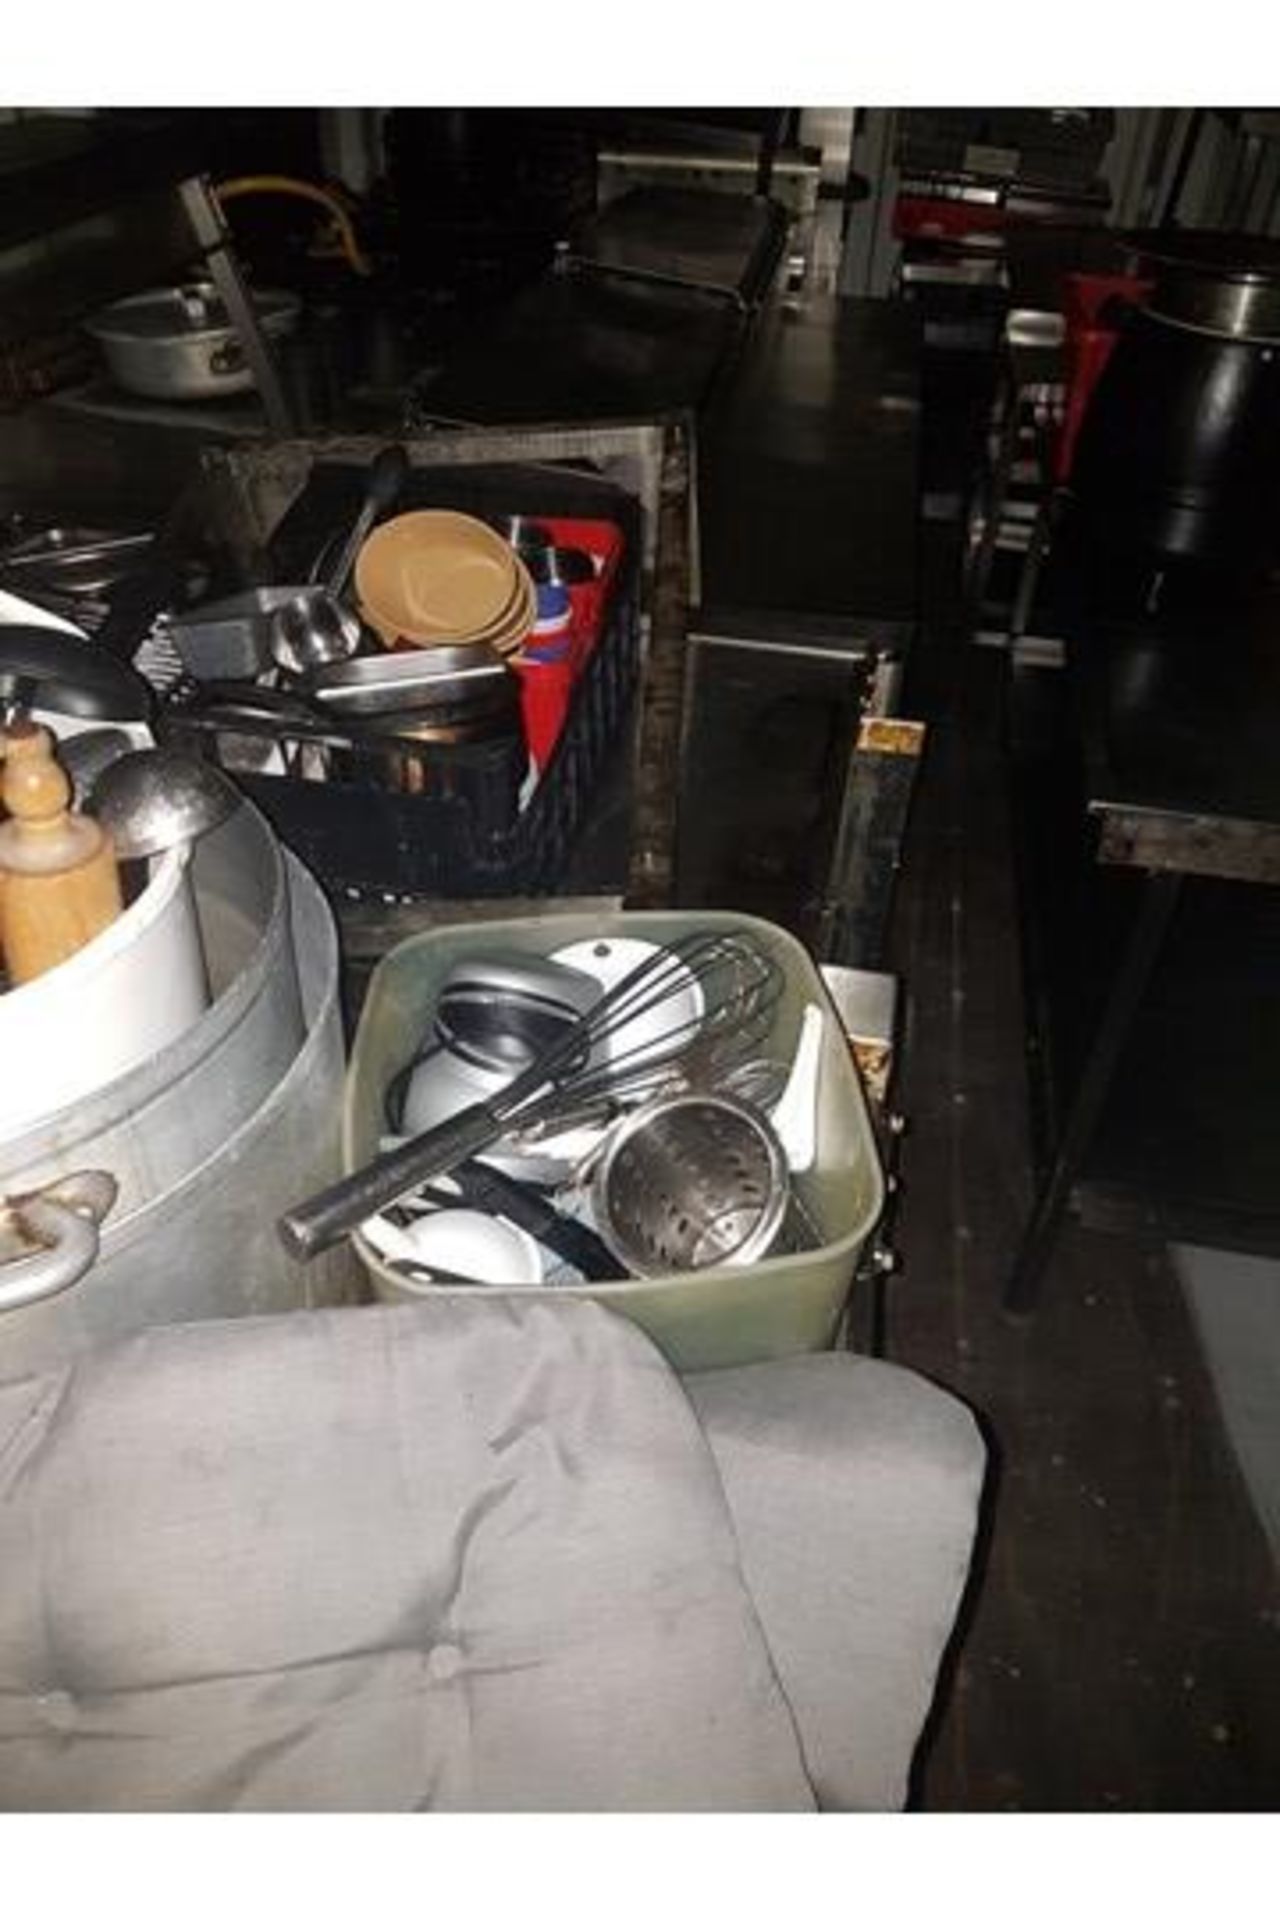 x 2 Stainless Steel Pans and Utensils